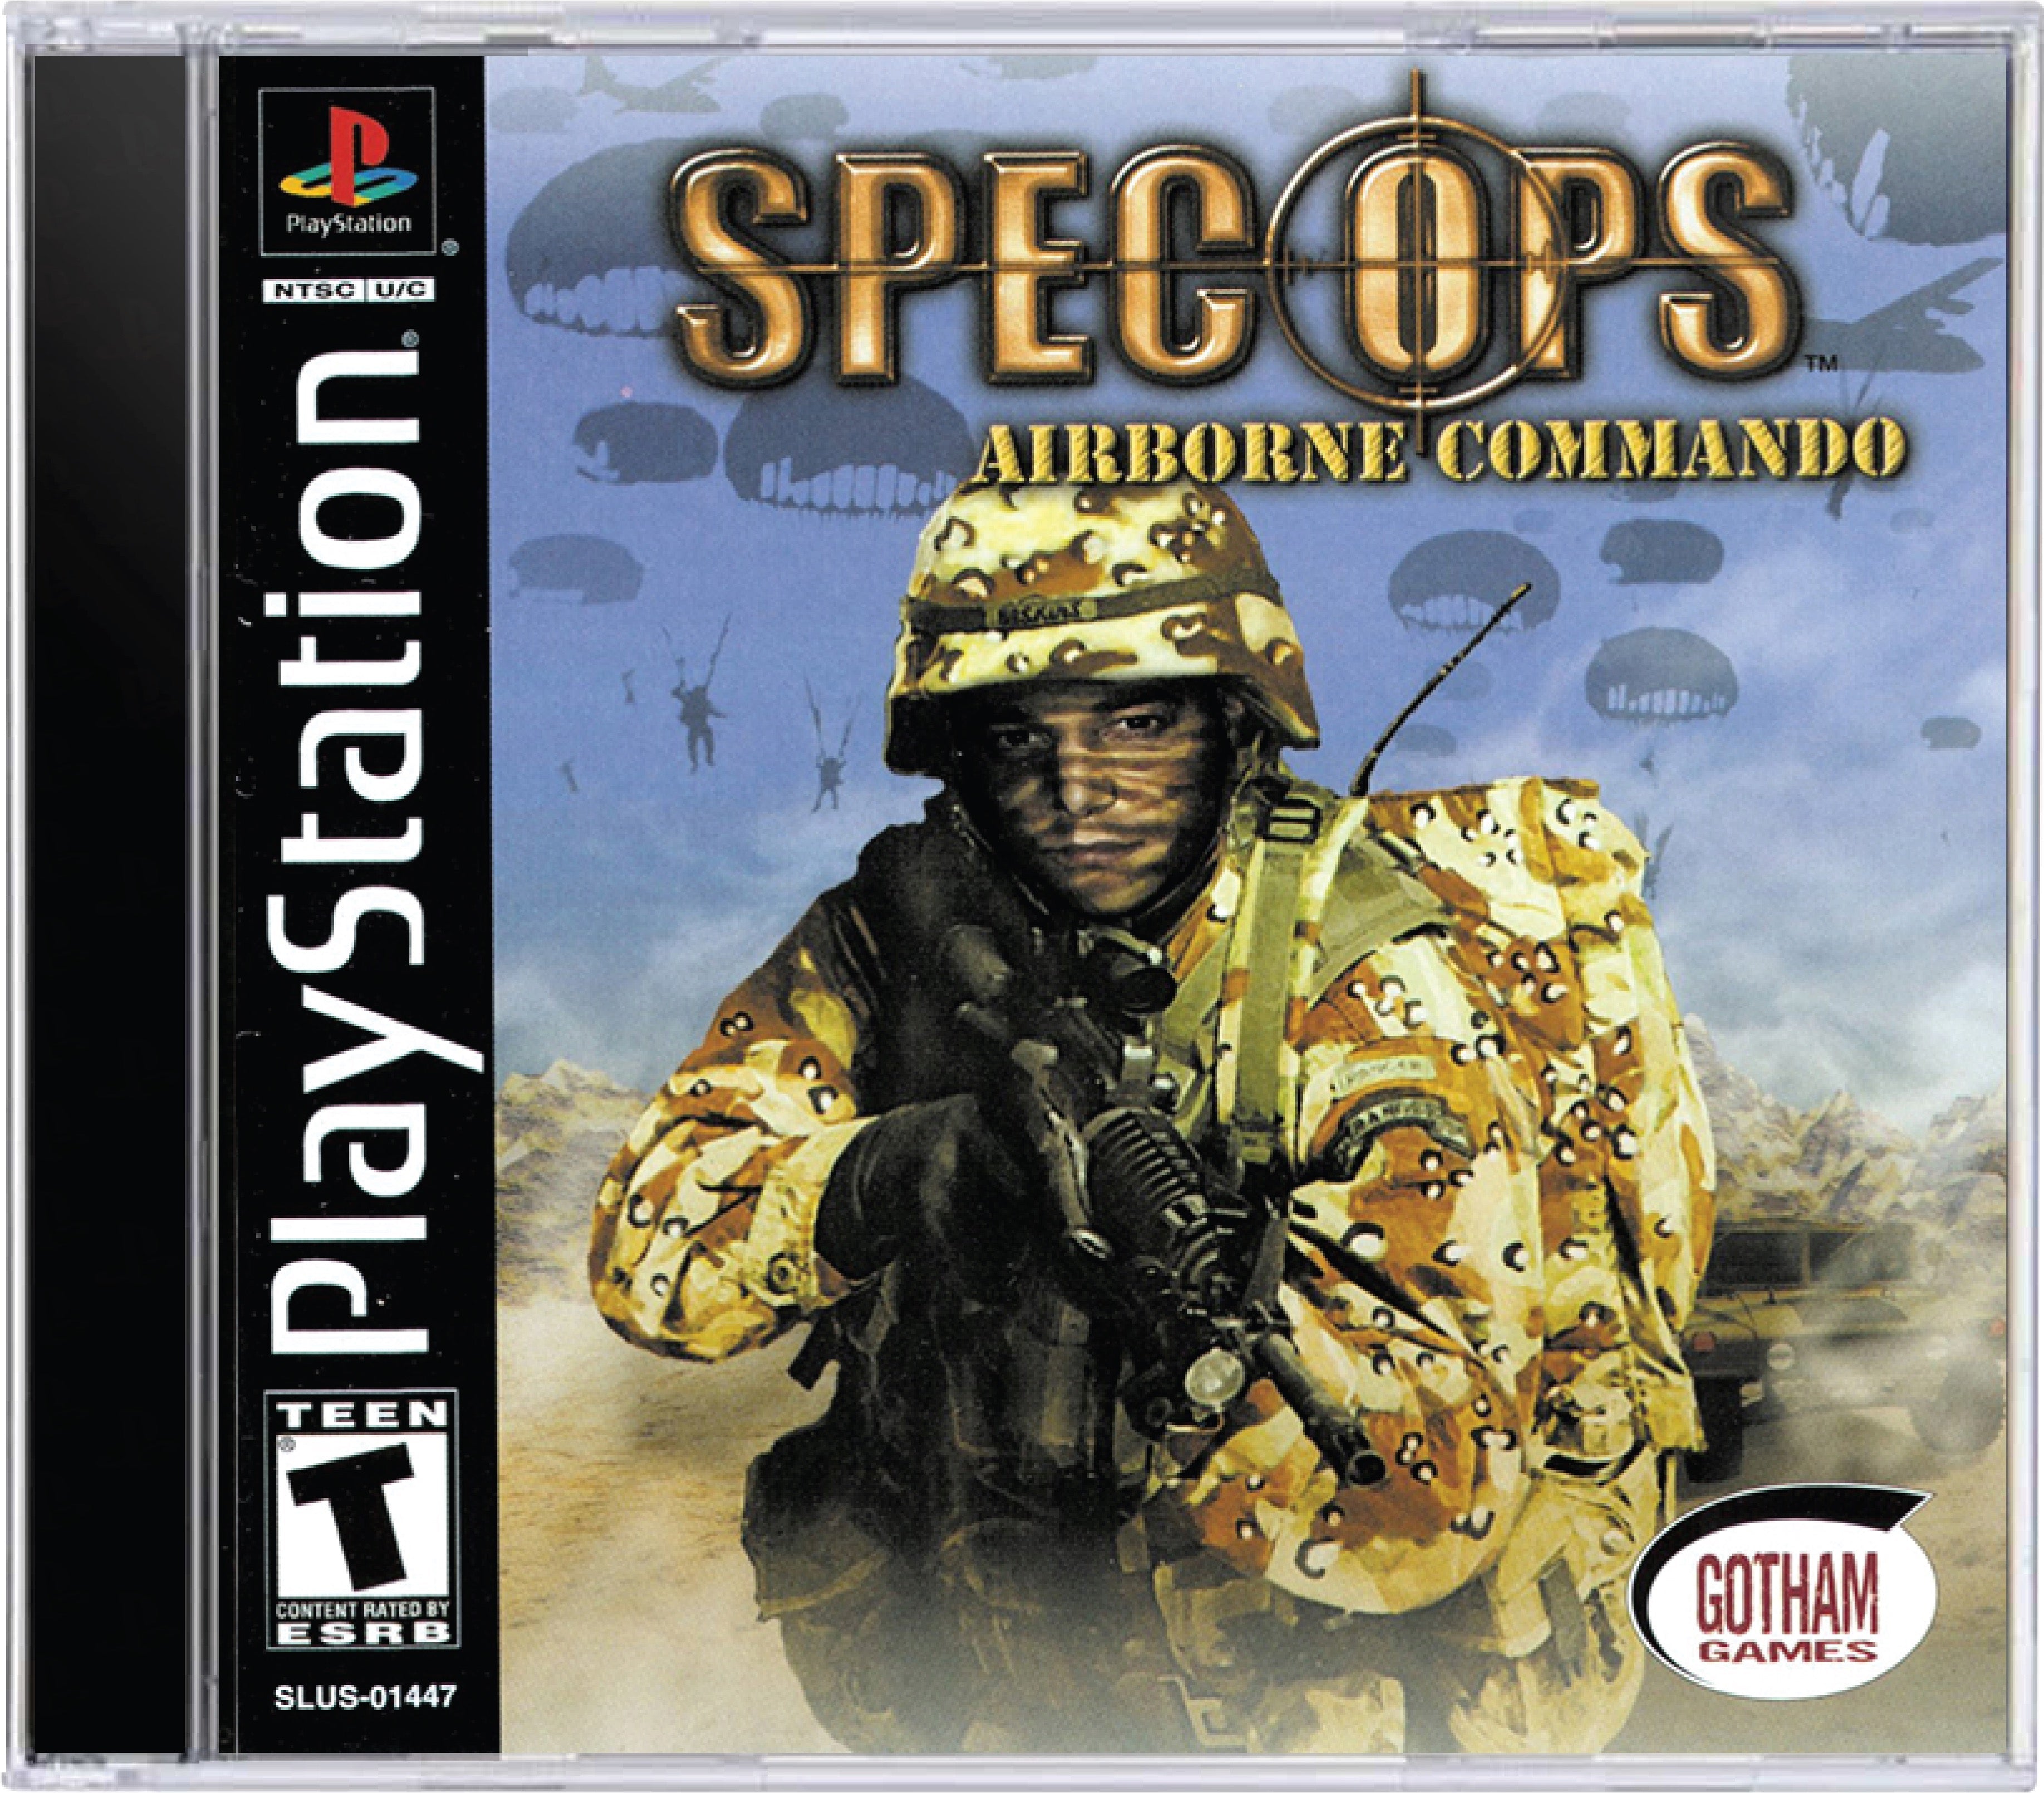 Spec Ops Airborne Commando Cover Art and Product Photo